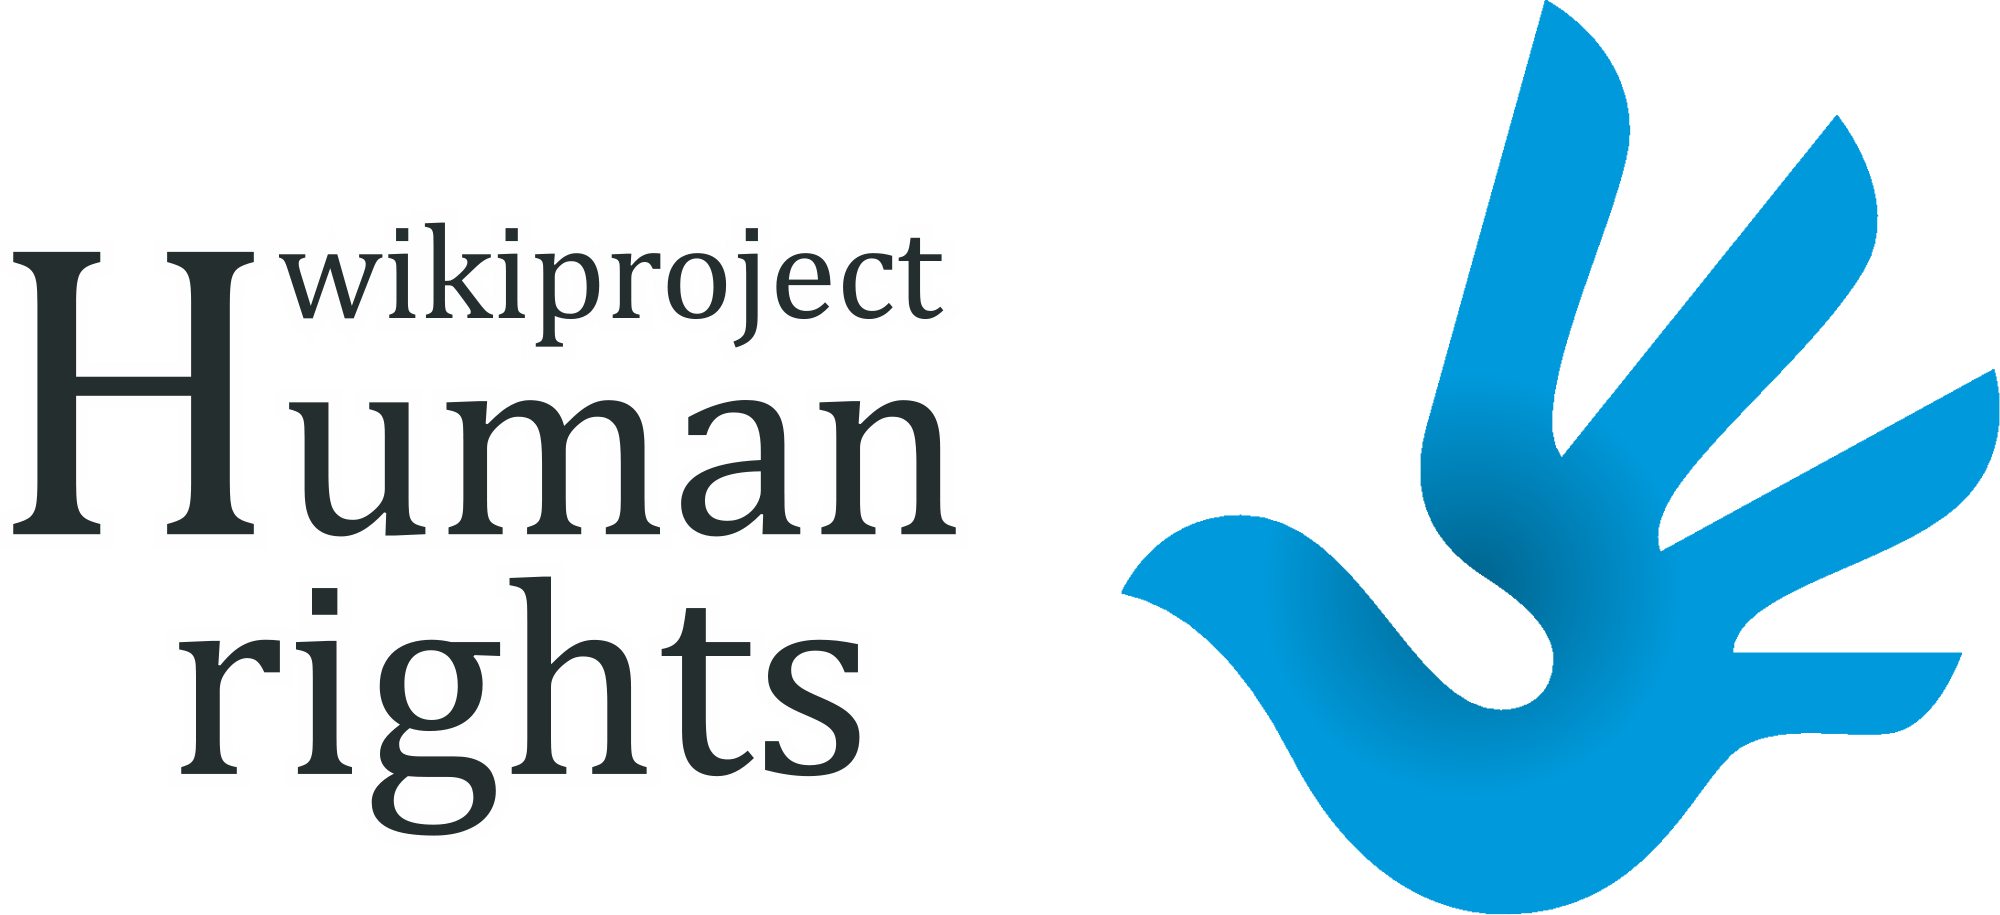 Human Rights Transparent Transparent Background - Development Project And Human Rights Violation (2000x915)